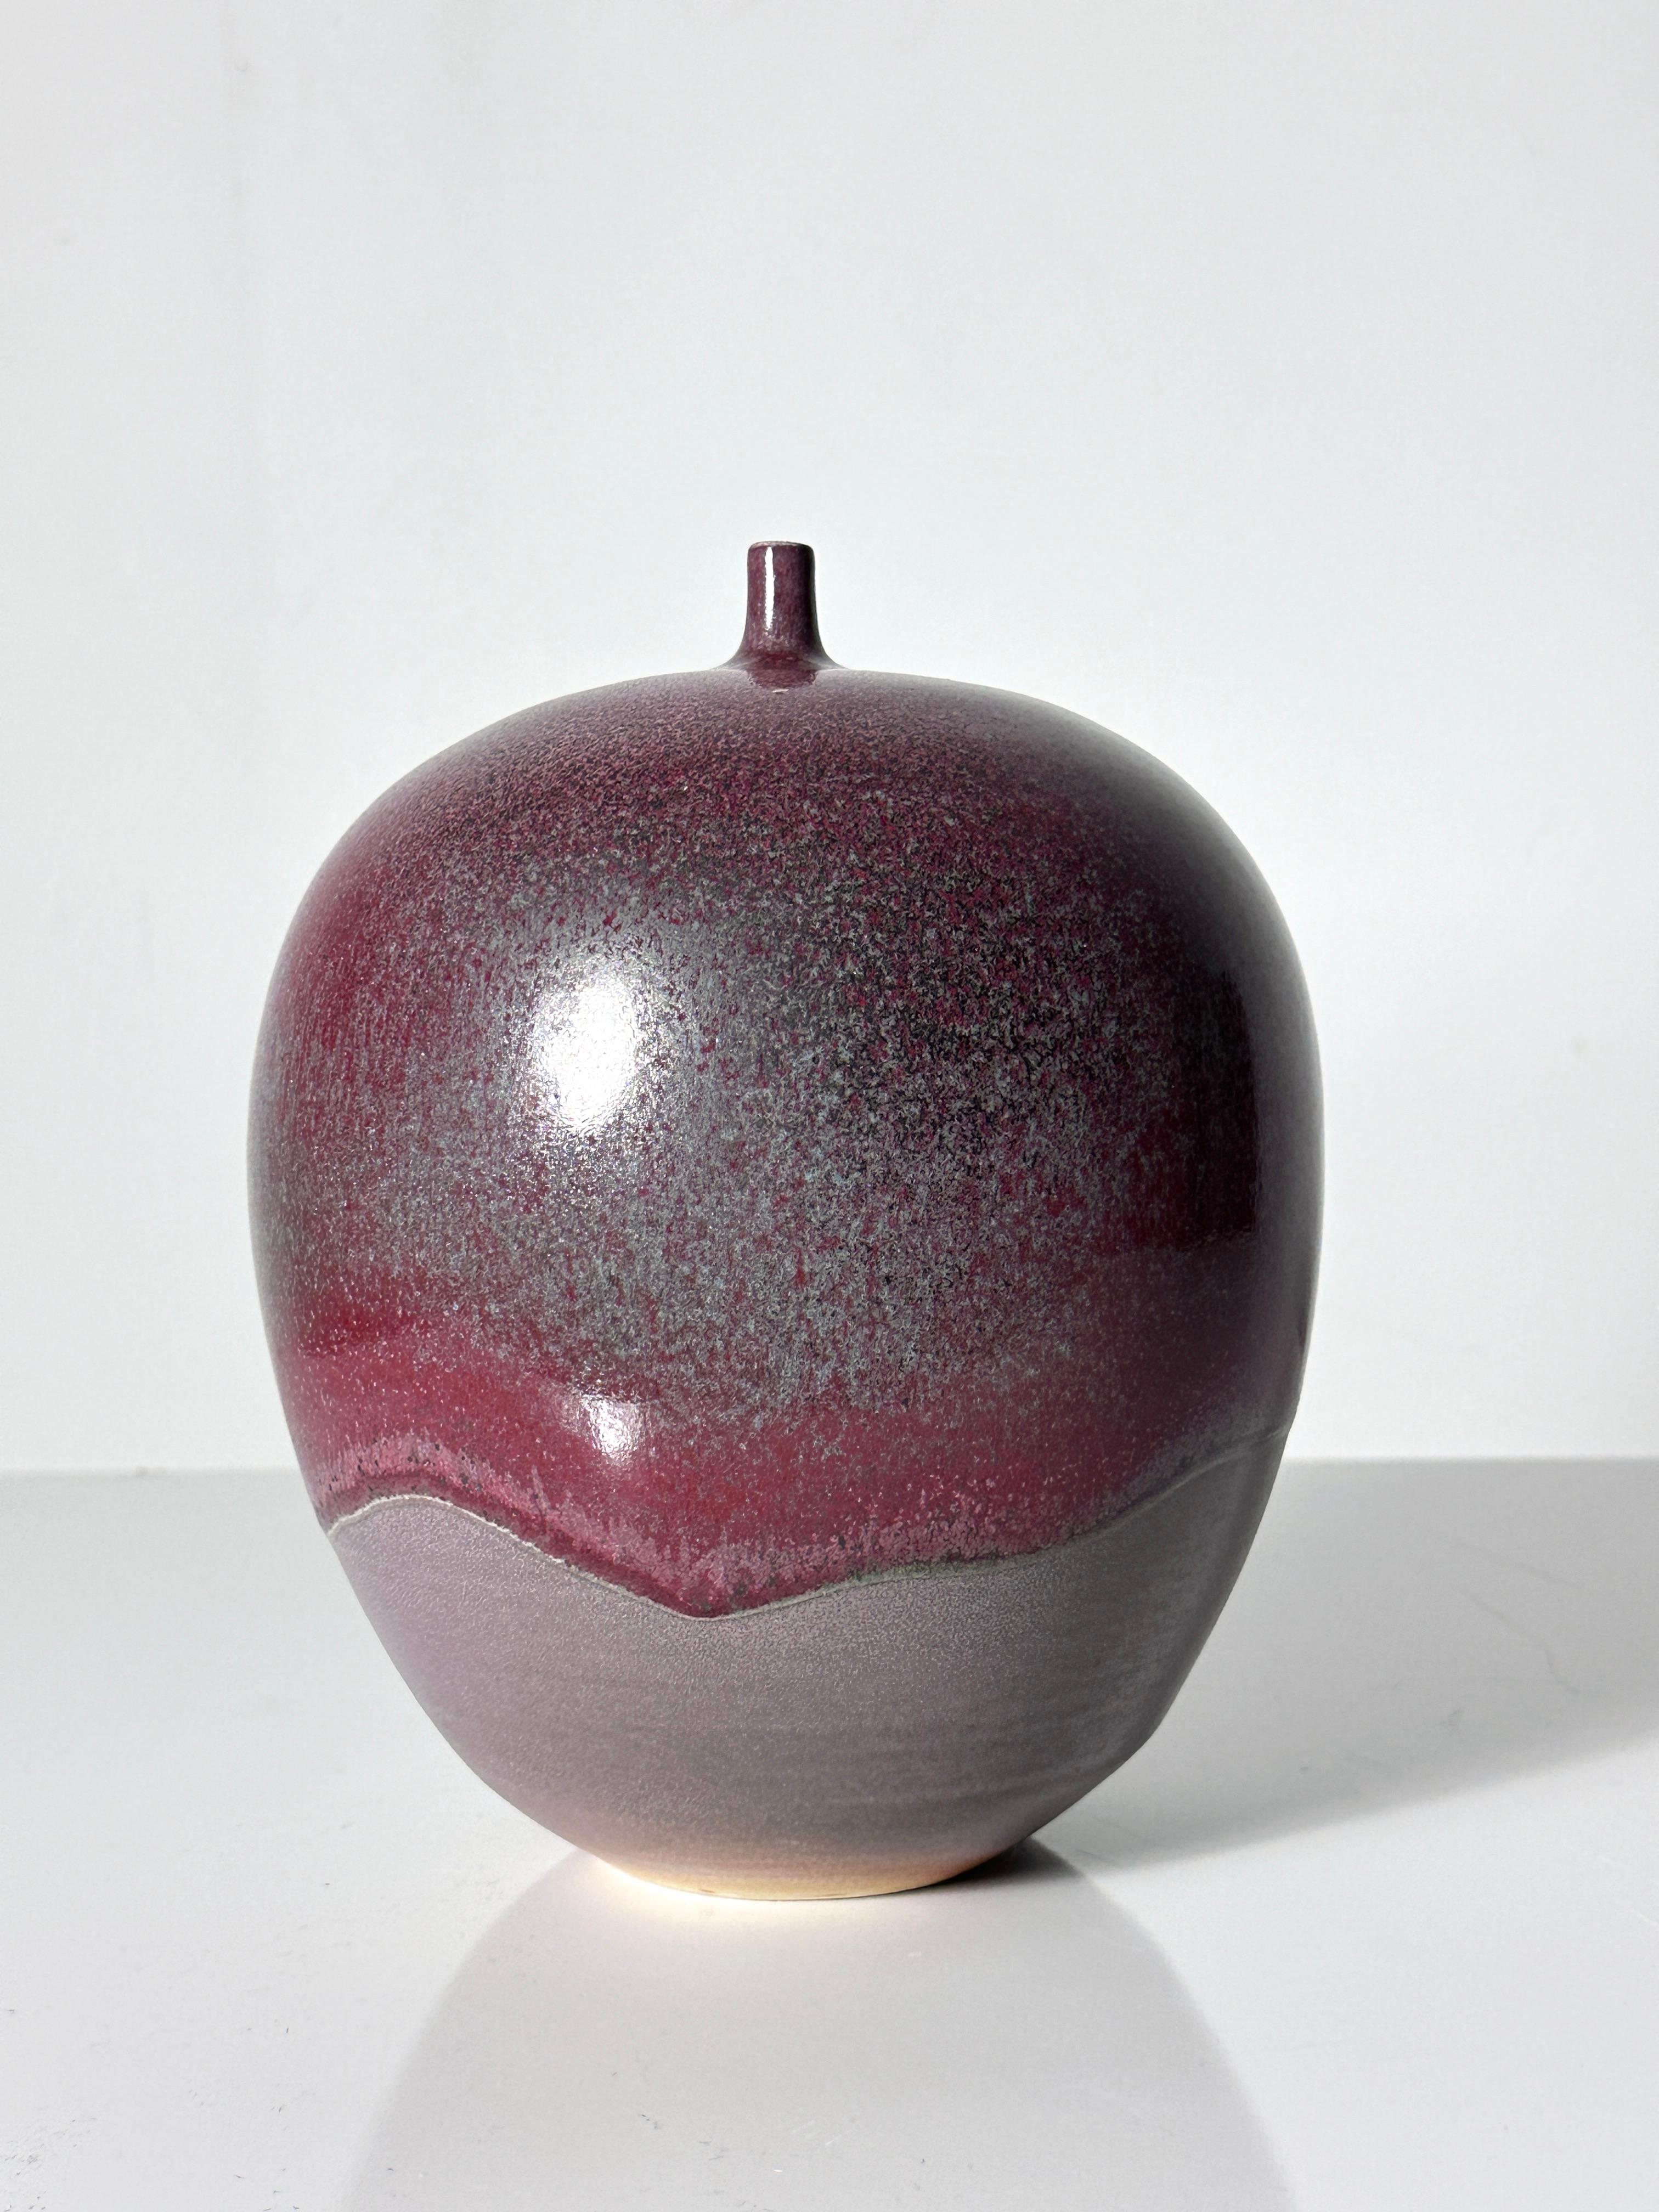 Teardrop porcelain vase by Cliff Lee USA 1994
Oxblood flambé glaze in uncommon drip design over a lower matte finish
Signed to underside and dated

From the estate of John Glick, thence by descent

7